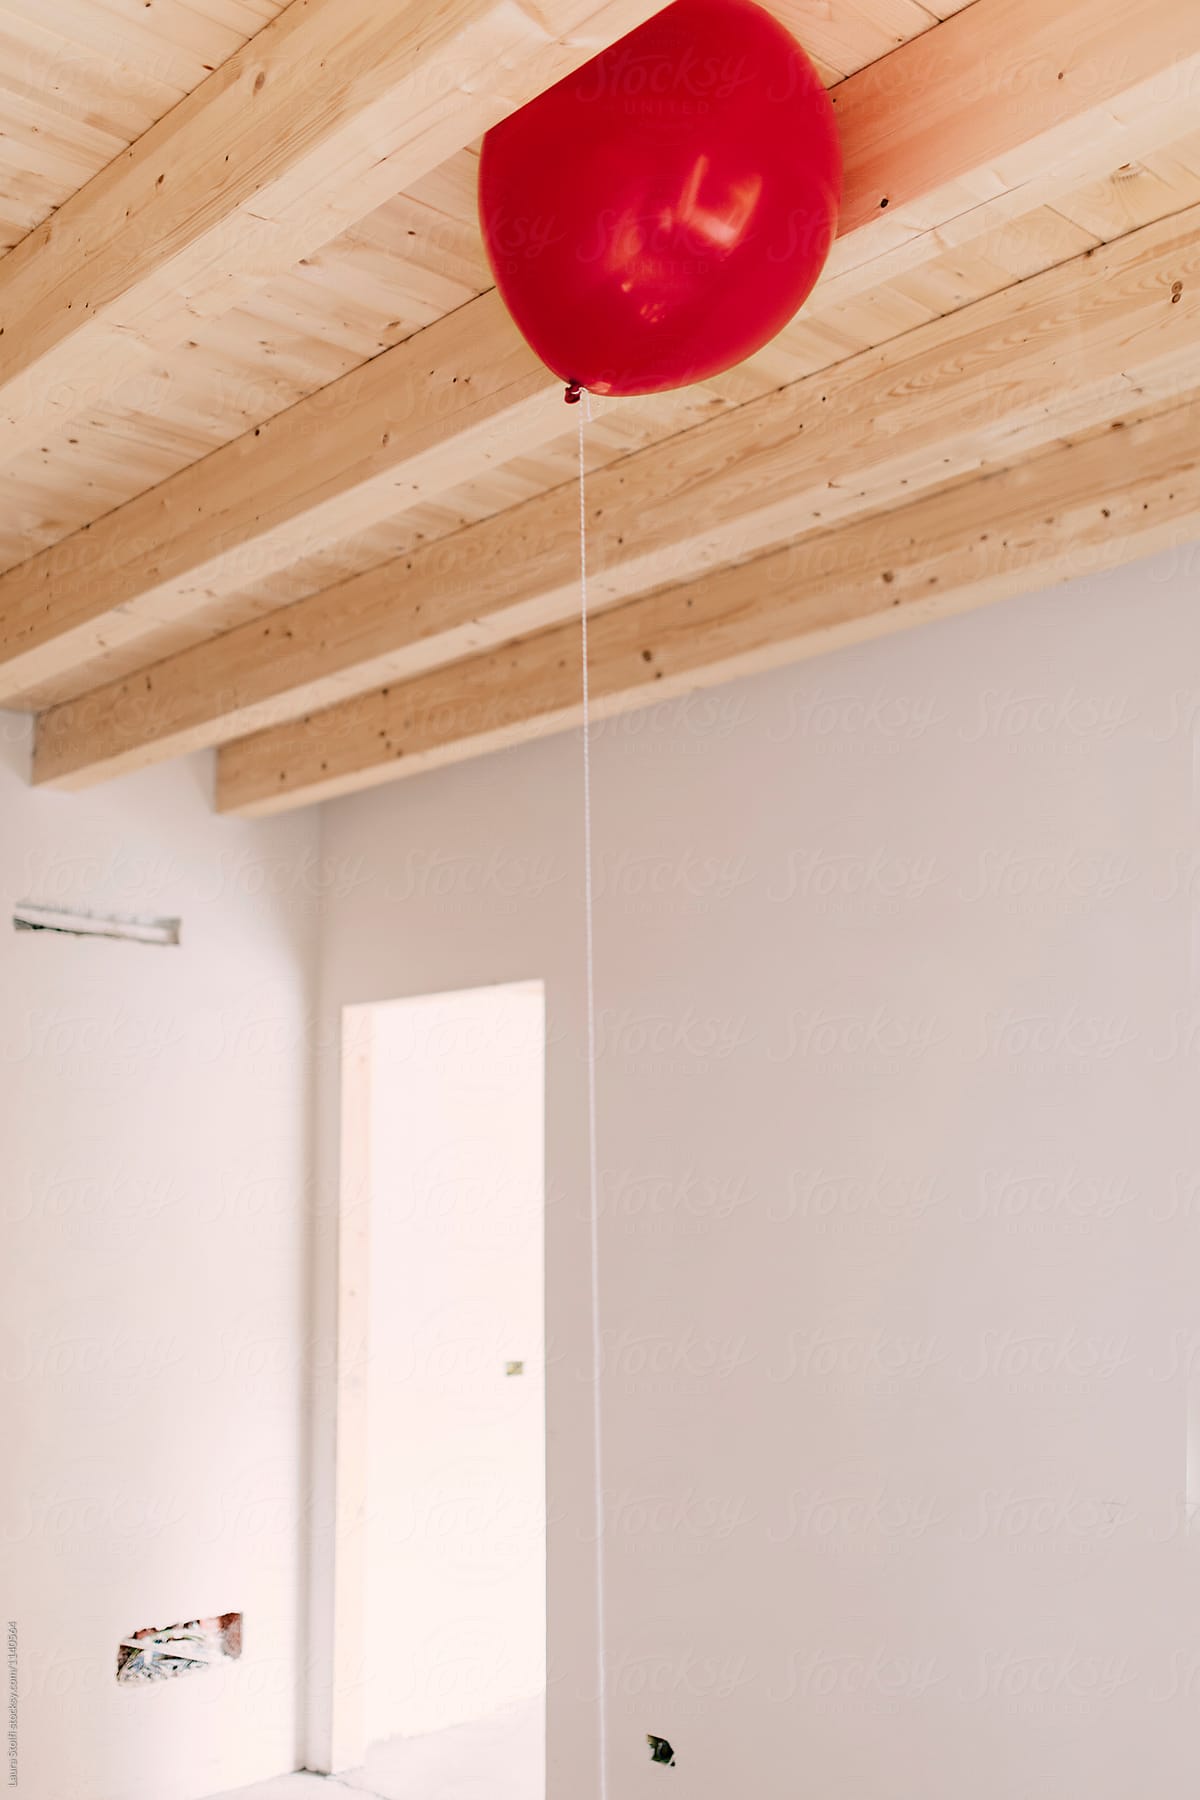 Single red balloon under wooden ceiling